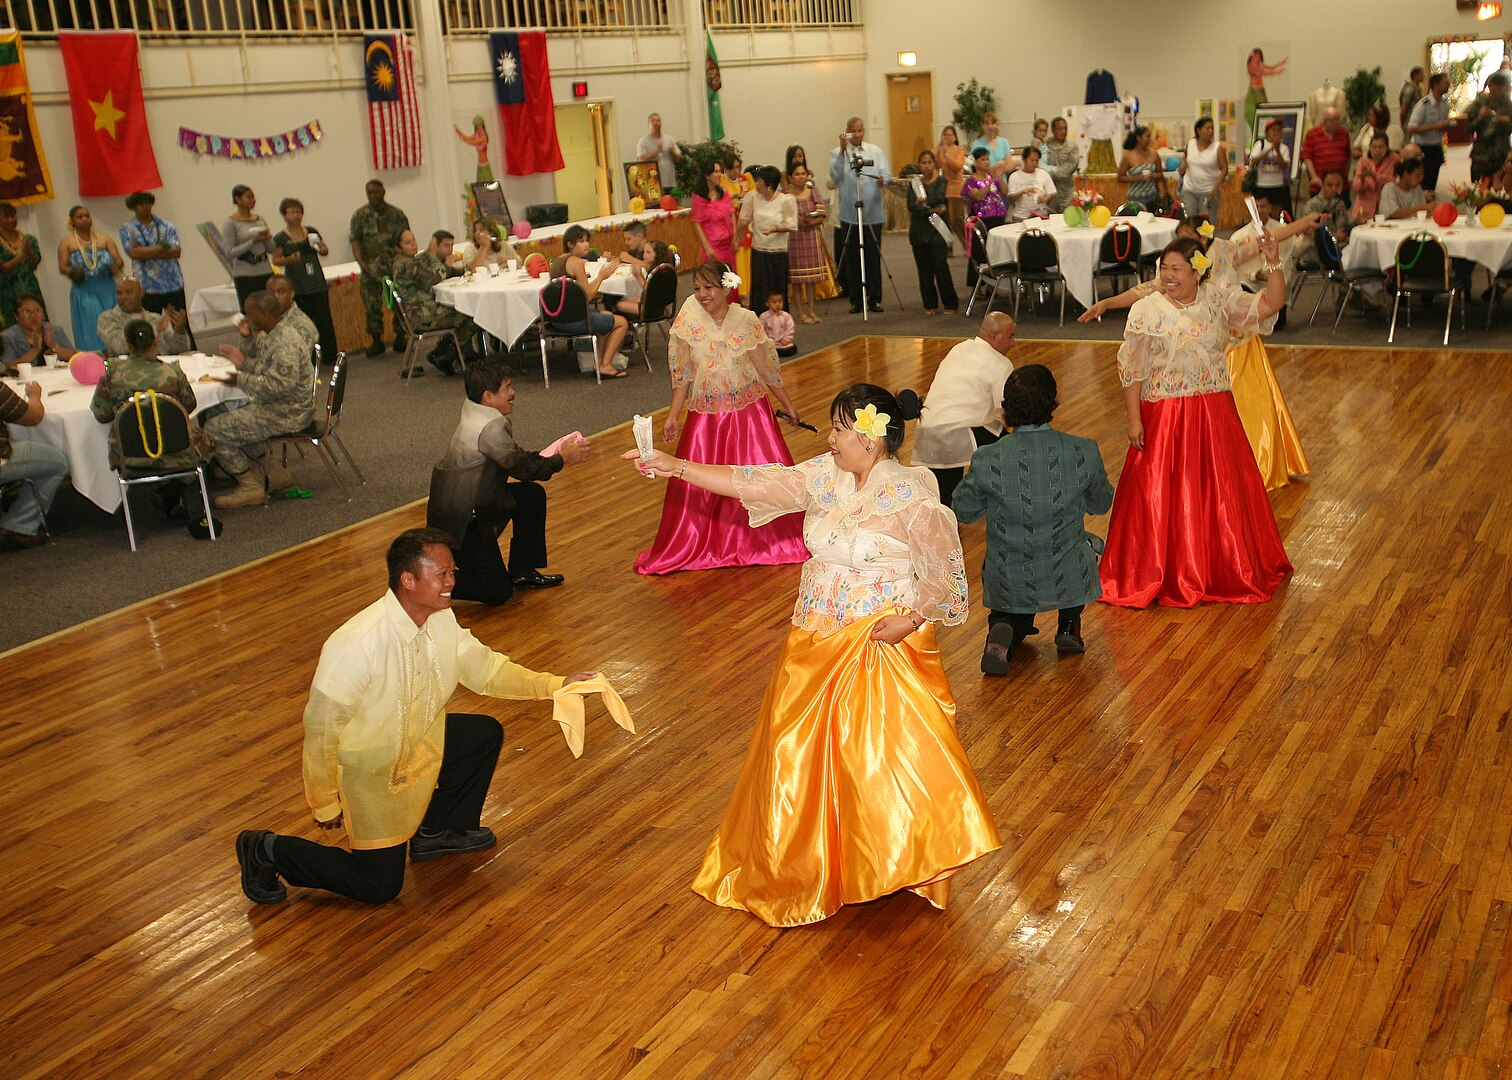 5/27/2008 - Members of Team Lackland dance during the Asian/Pacific Islander food tasting at Arnold Hall May 27.  More than 400 people came out to sample food and watch dancing, martial arts and sumo demonstrations.  
(USAF photo by Robbin Cresswell)